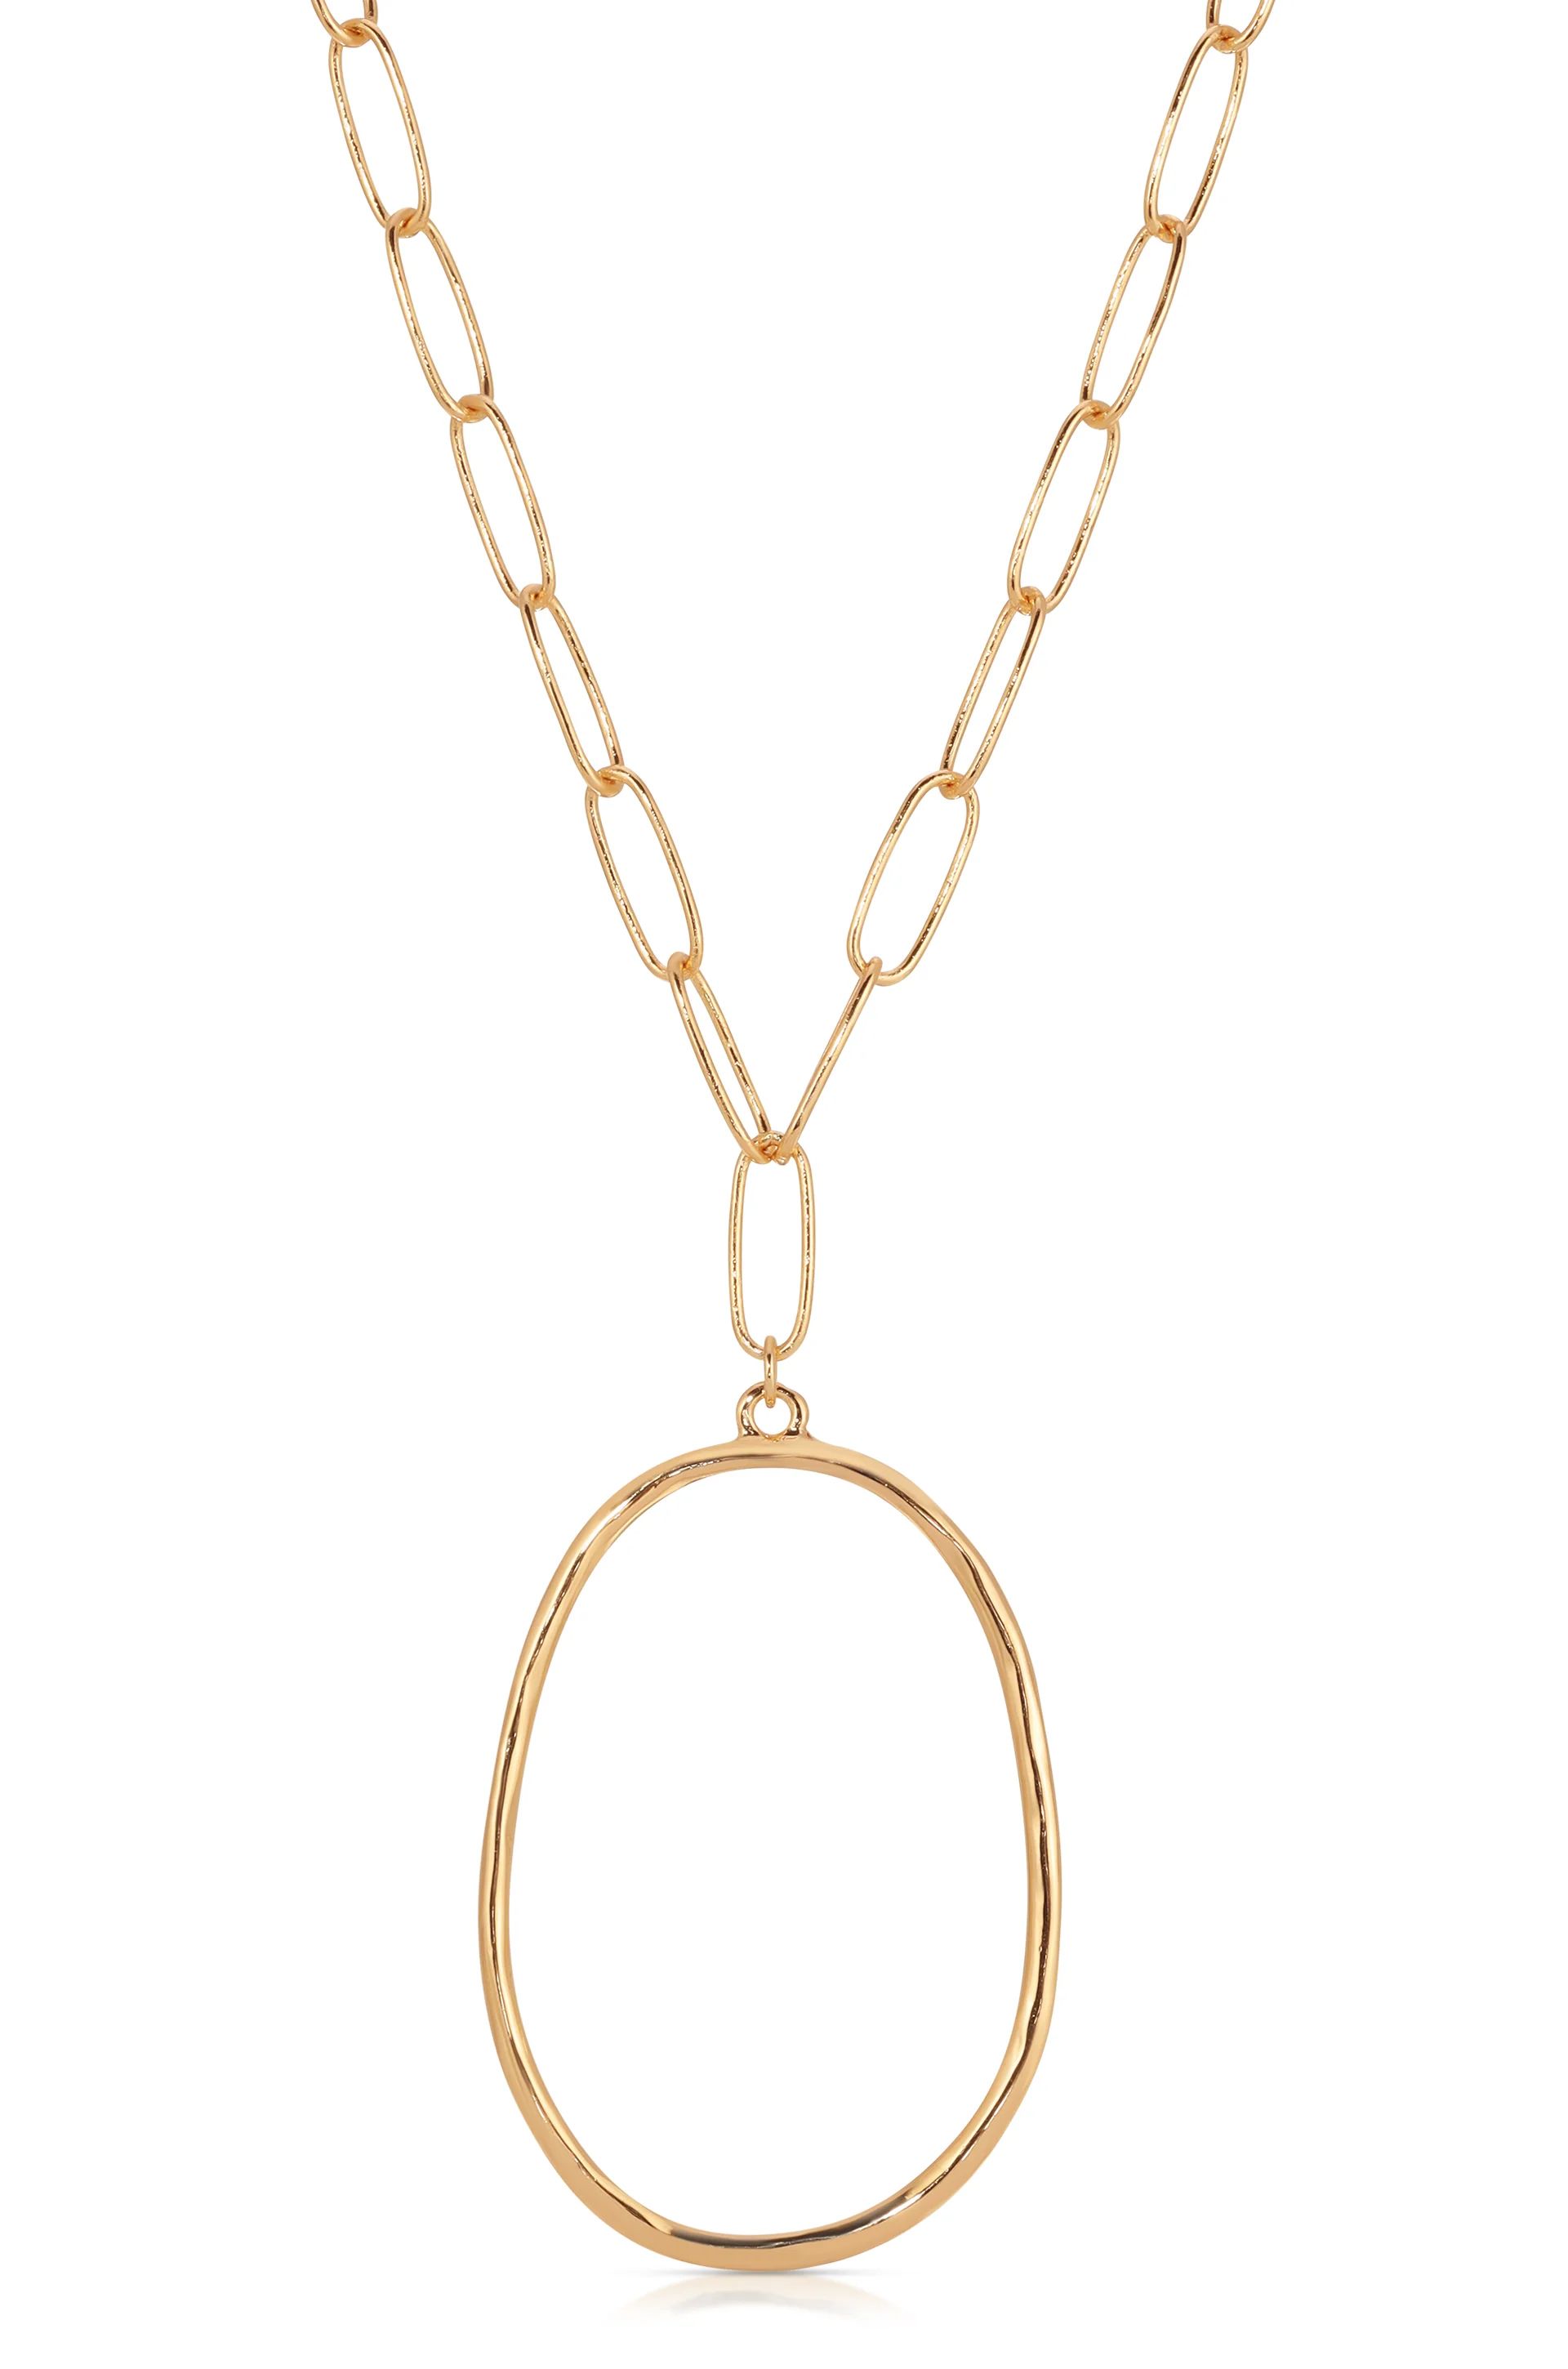 Large 18k Gold Plated Oval Pendant Chain Link Necklace | Ettika